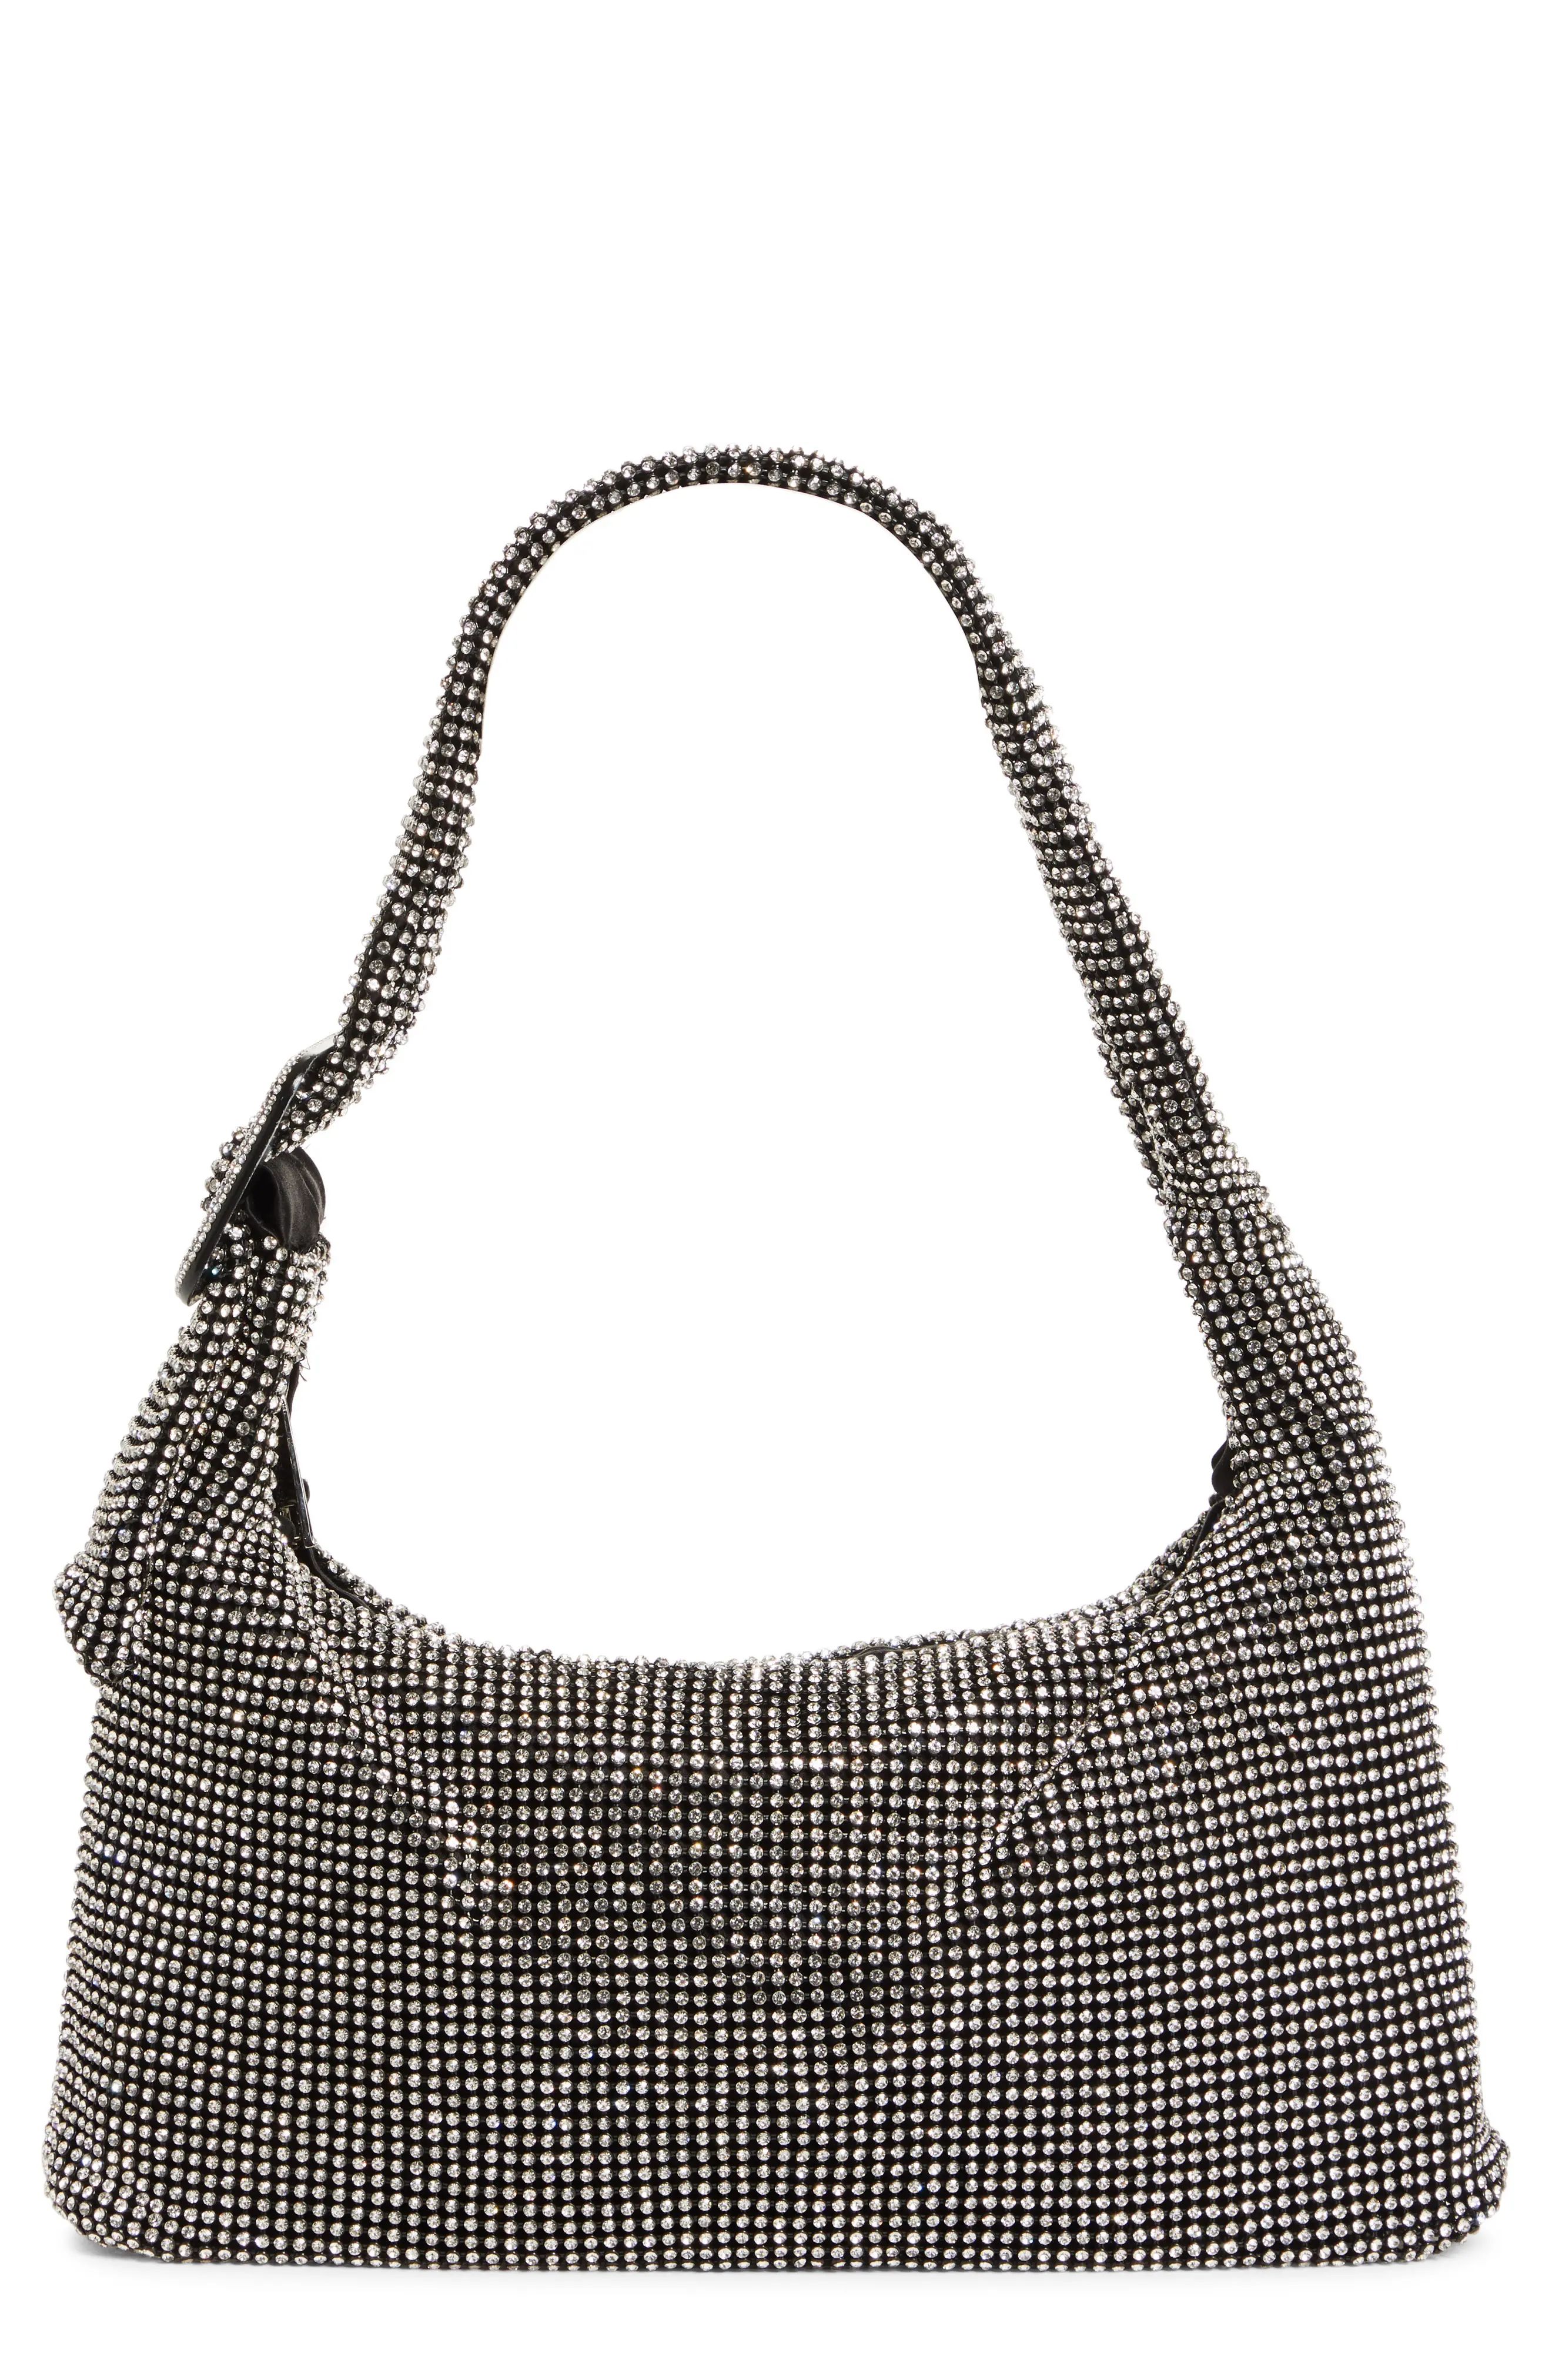 Benedetta Bruzziches Benedatta Bruzziches Pina Bausch Crystal Mesh Hobo in A Thousand And One Night  | Nordstrom